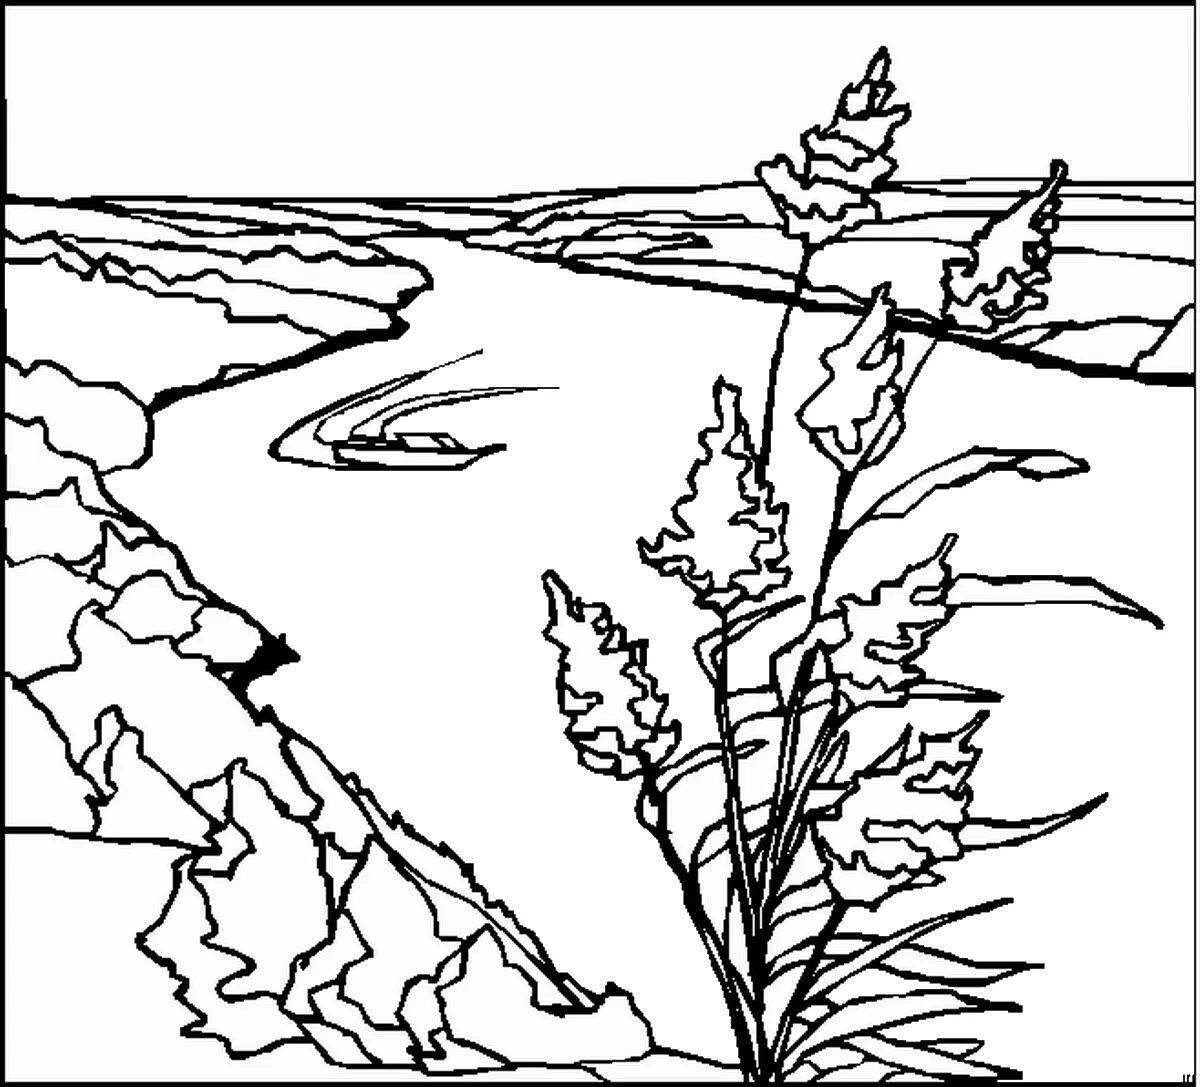 Blessed siberia coloring page